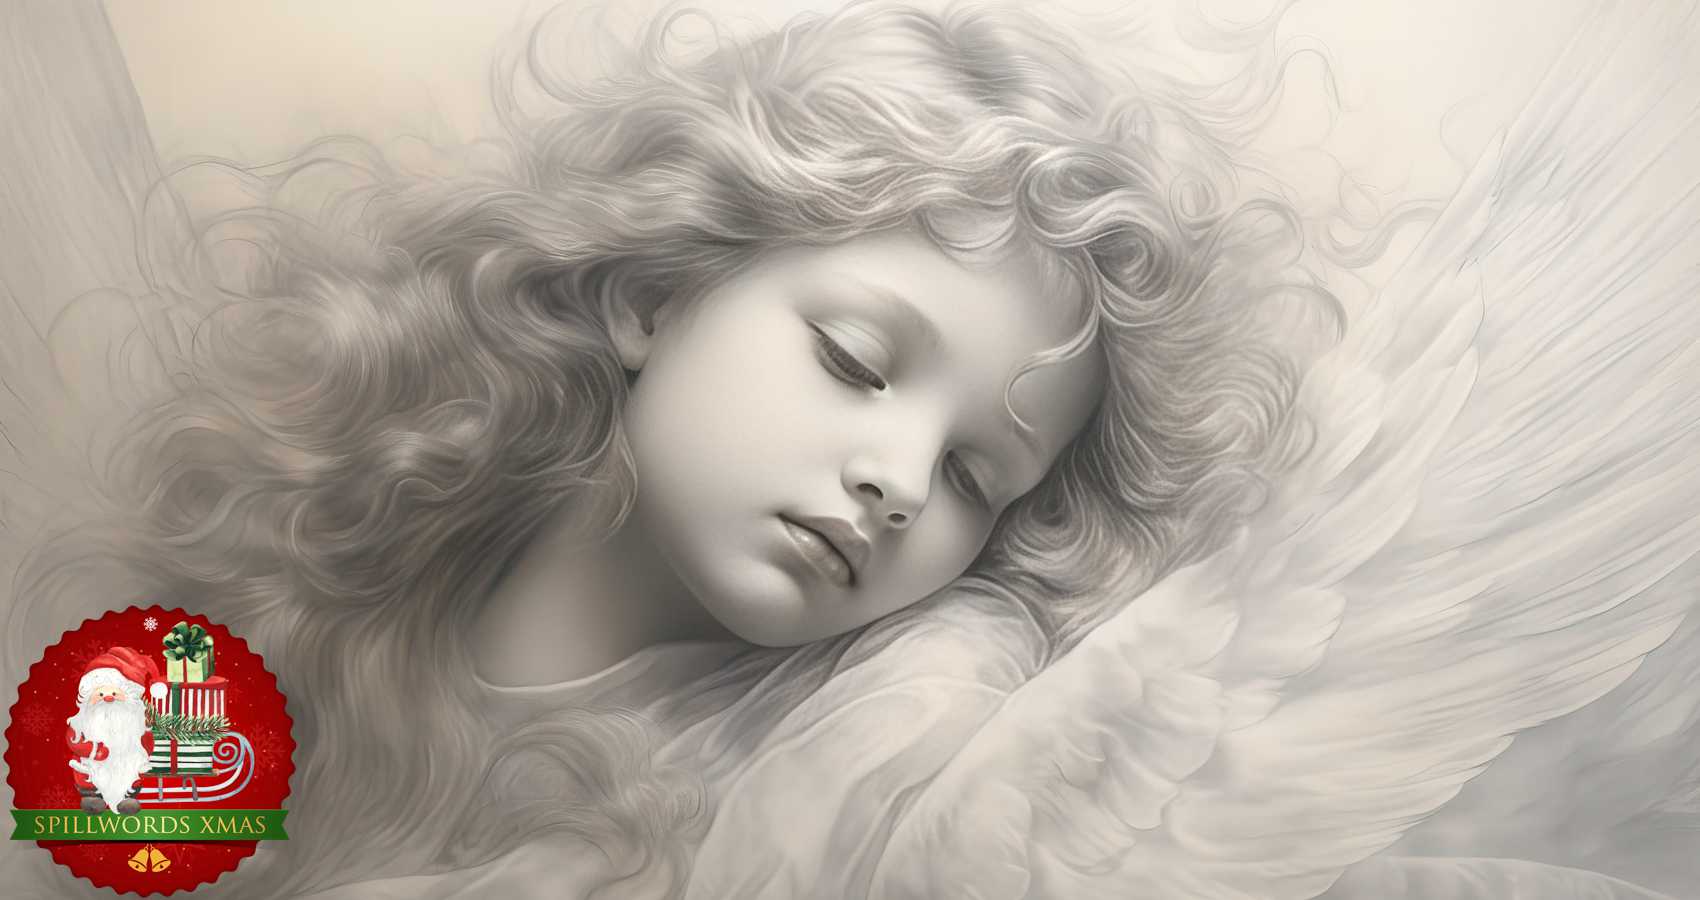 An Angel's Wish, a poem by Carmen Baca at Spillwords.com